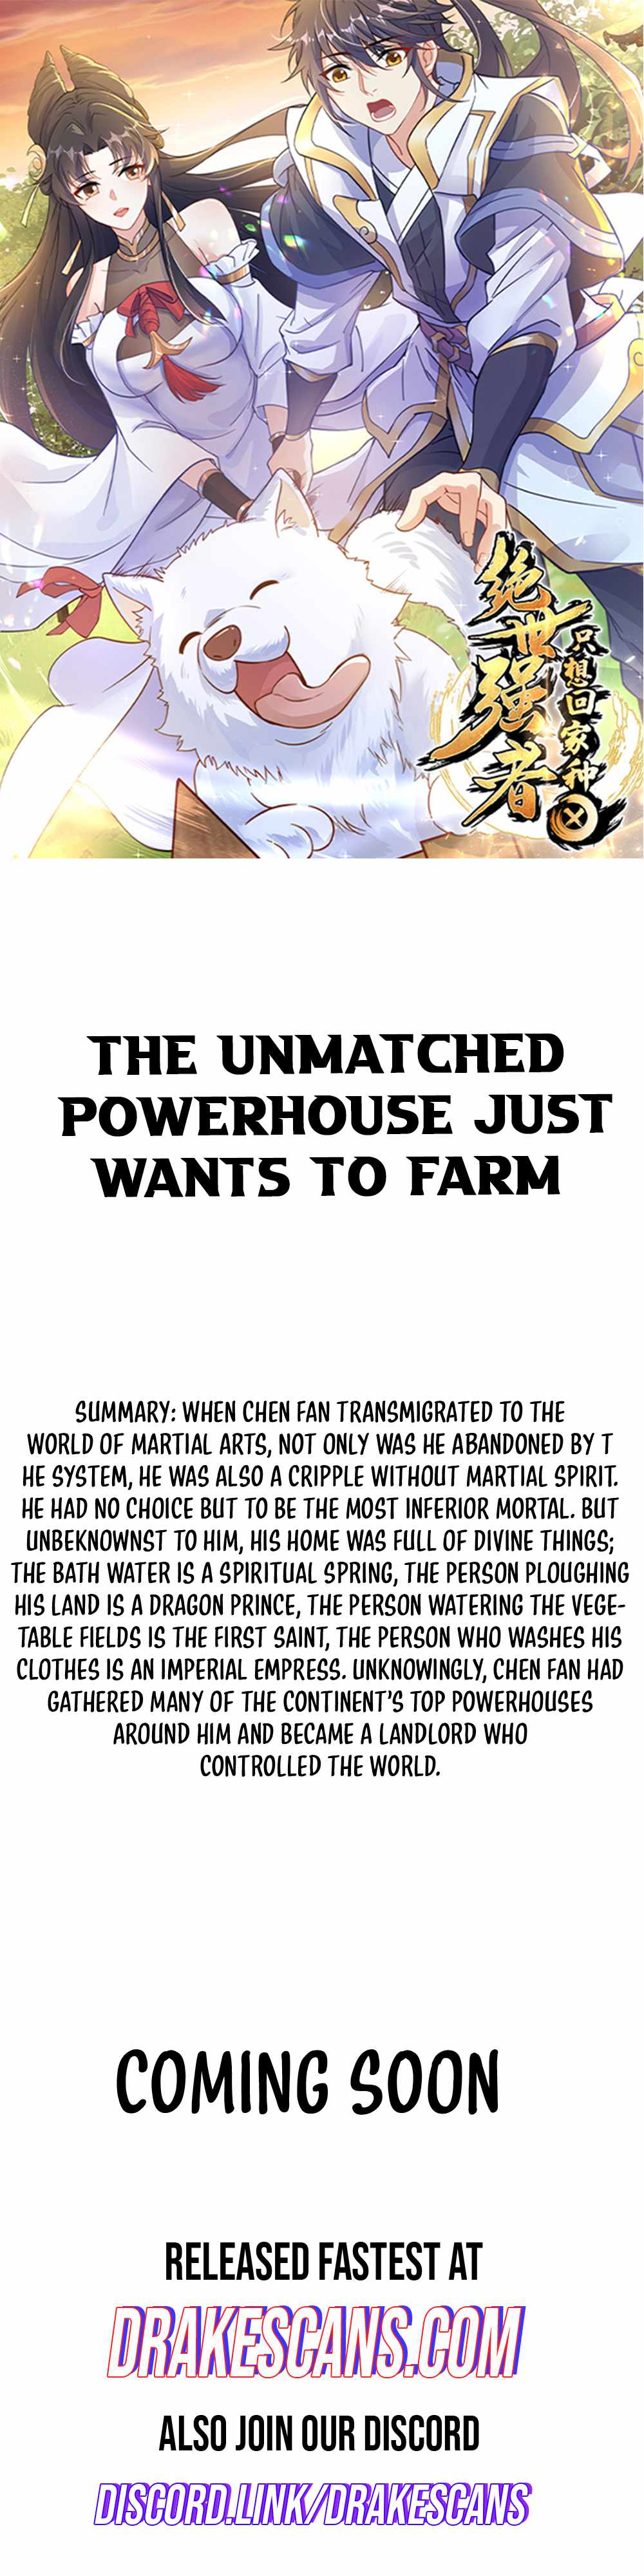 The Unmatched Powerhouse Just Wants To Farm - Page 1